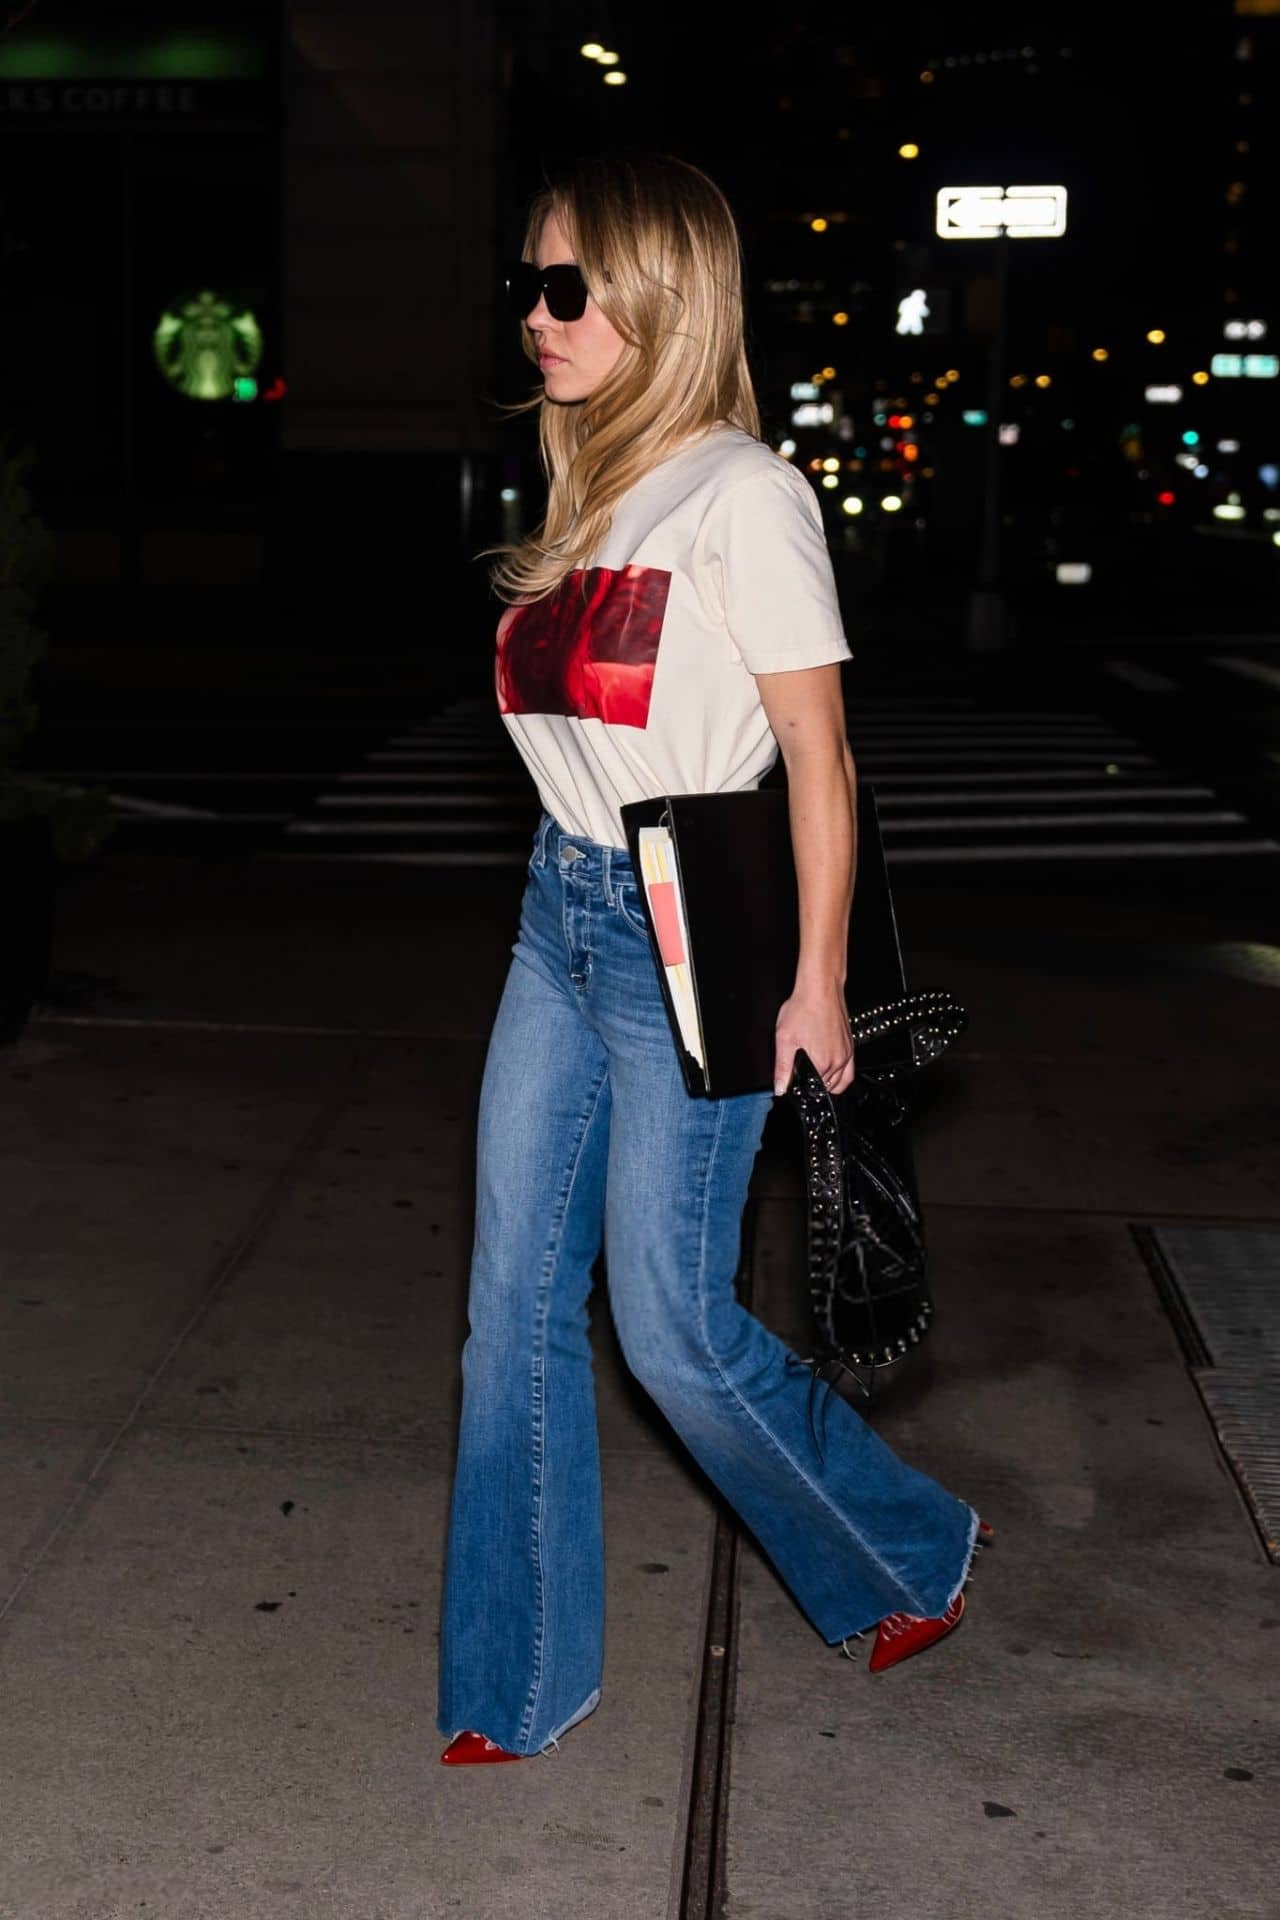 Sydney Sweeney Turns NYC Streets into Runway with Her Effortless Style